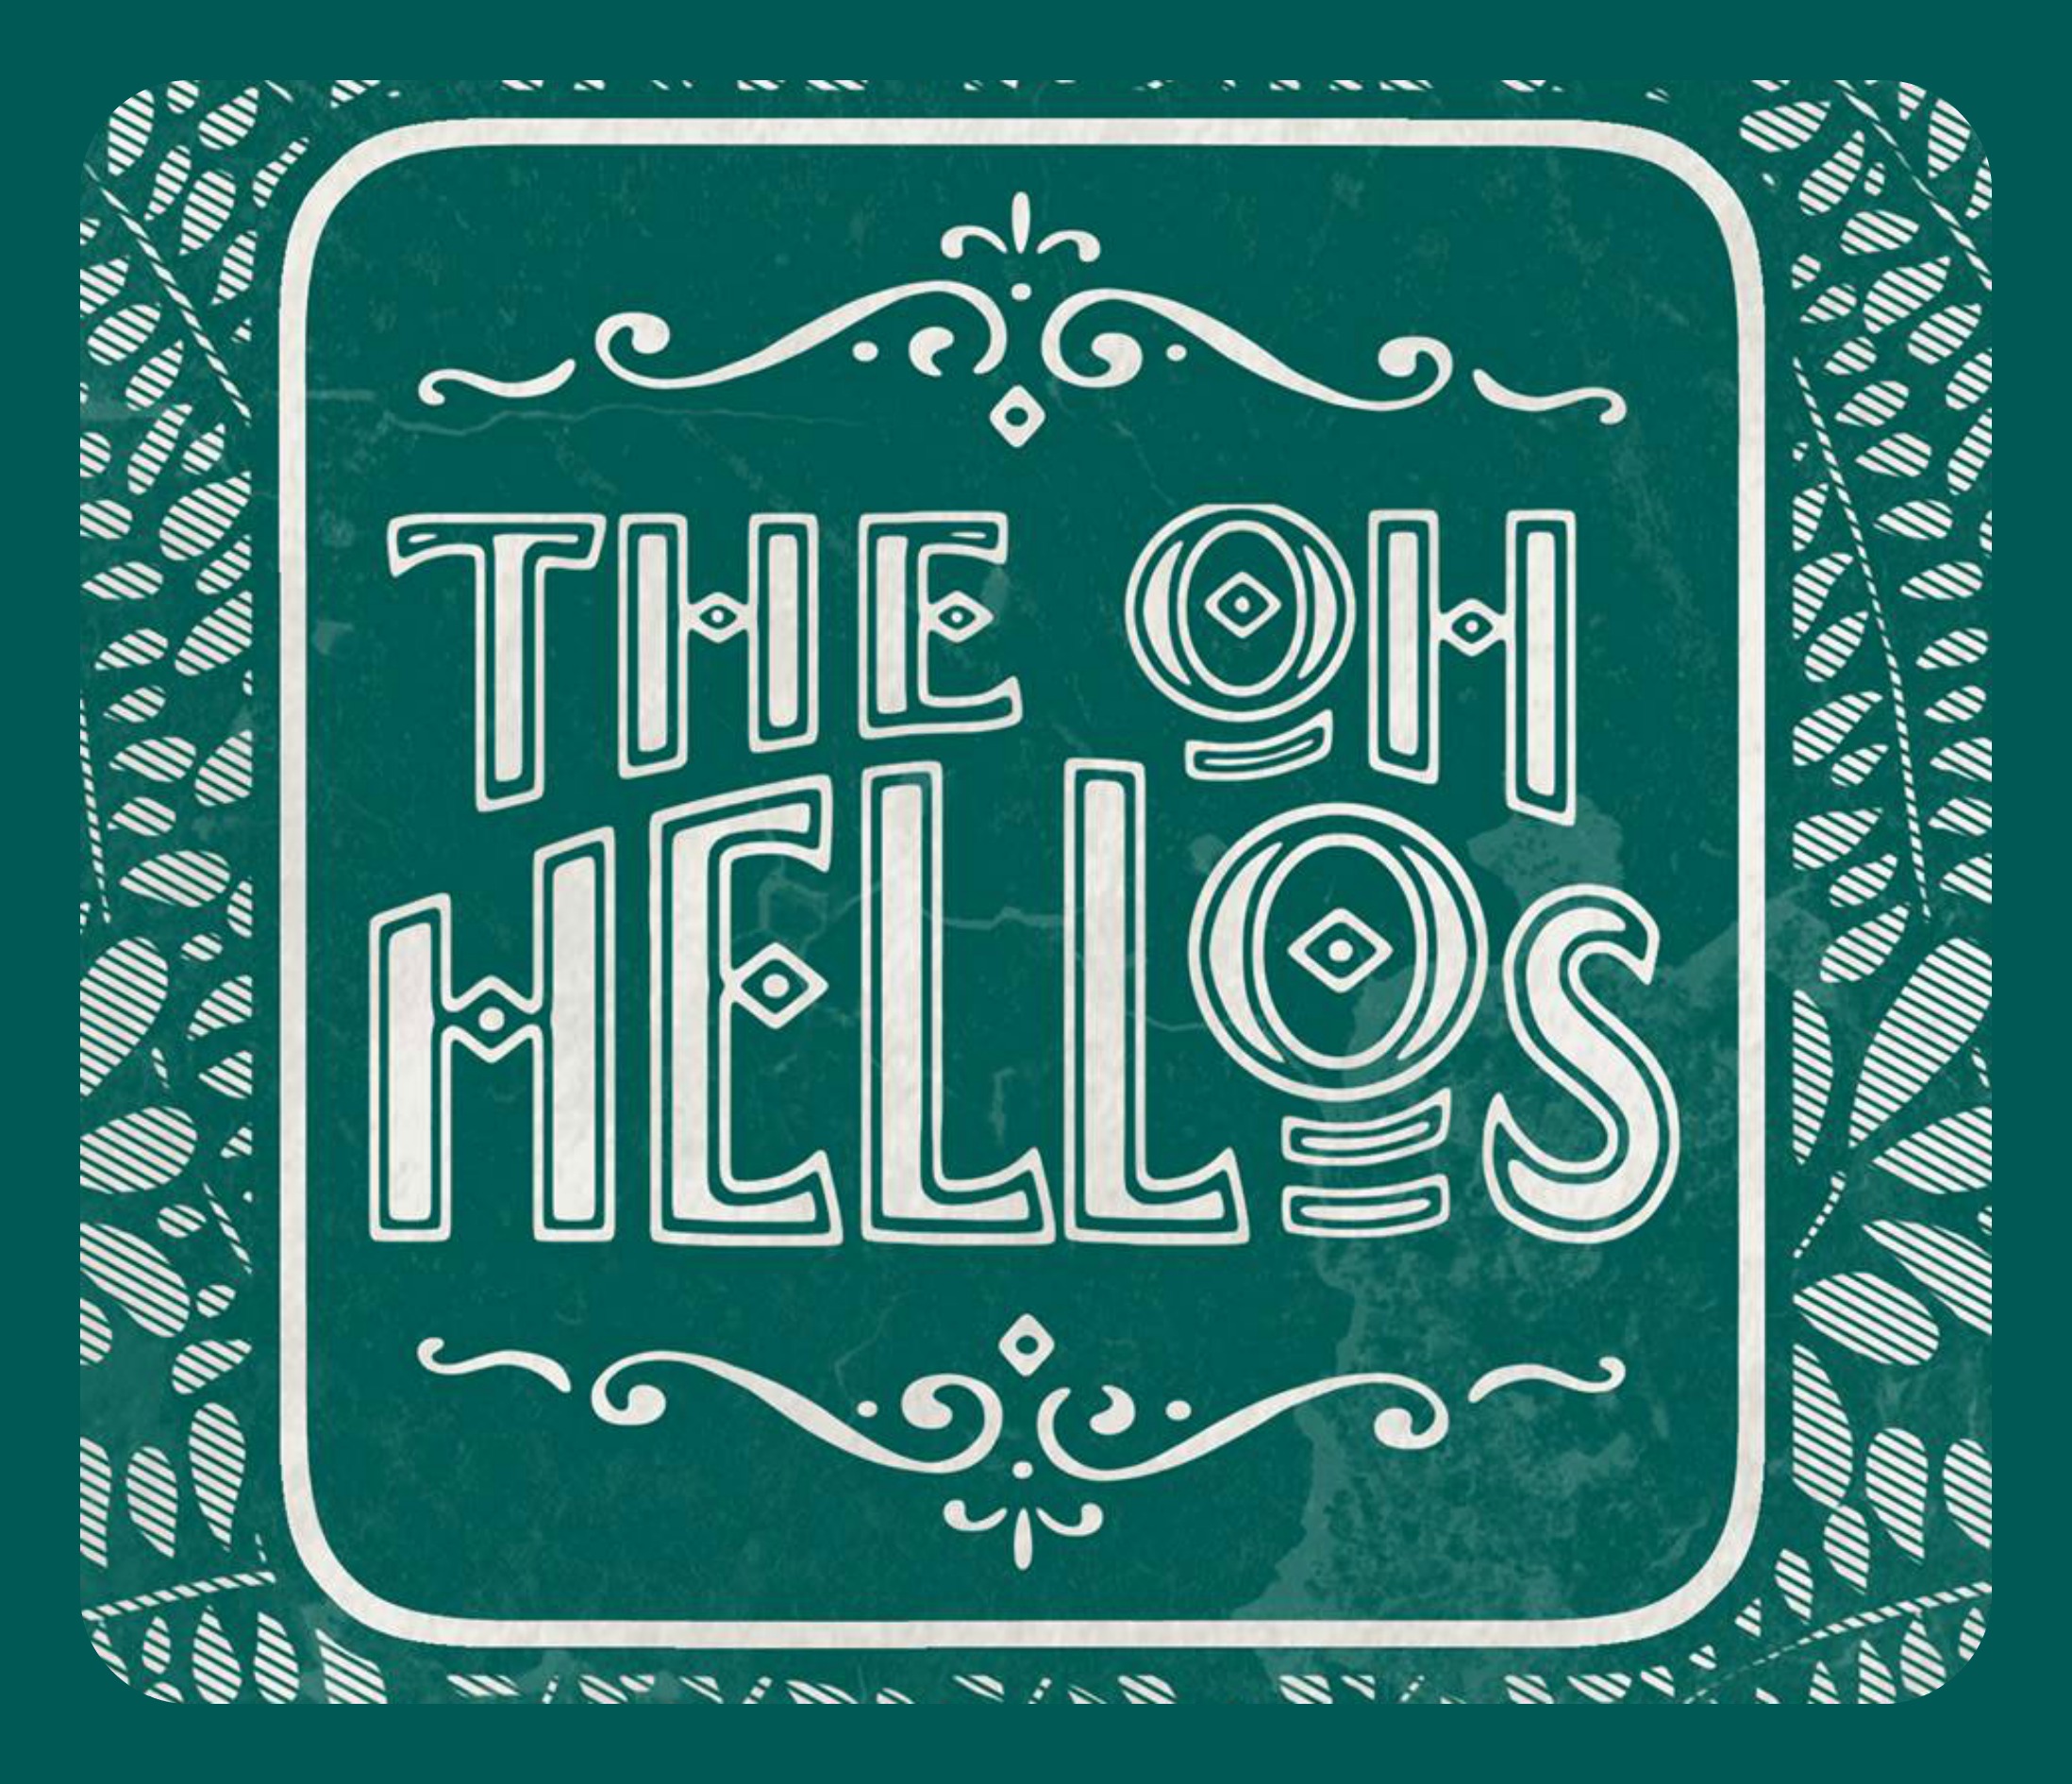 The Oh hellos. The Oh hellos о группе. Dear Wormwood the Oh hellos. The Oh hellos альбомы.